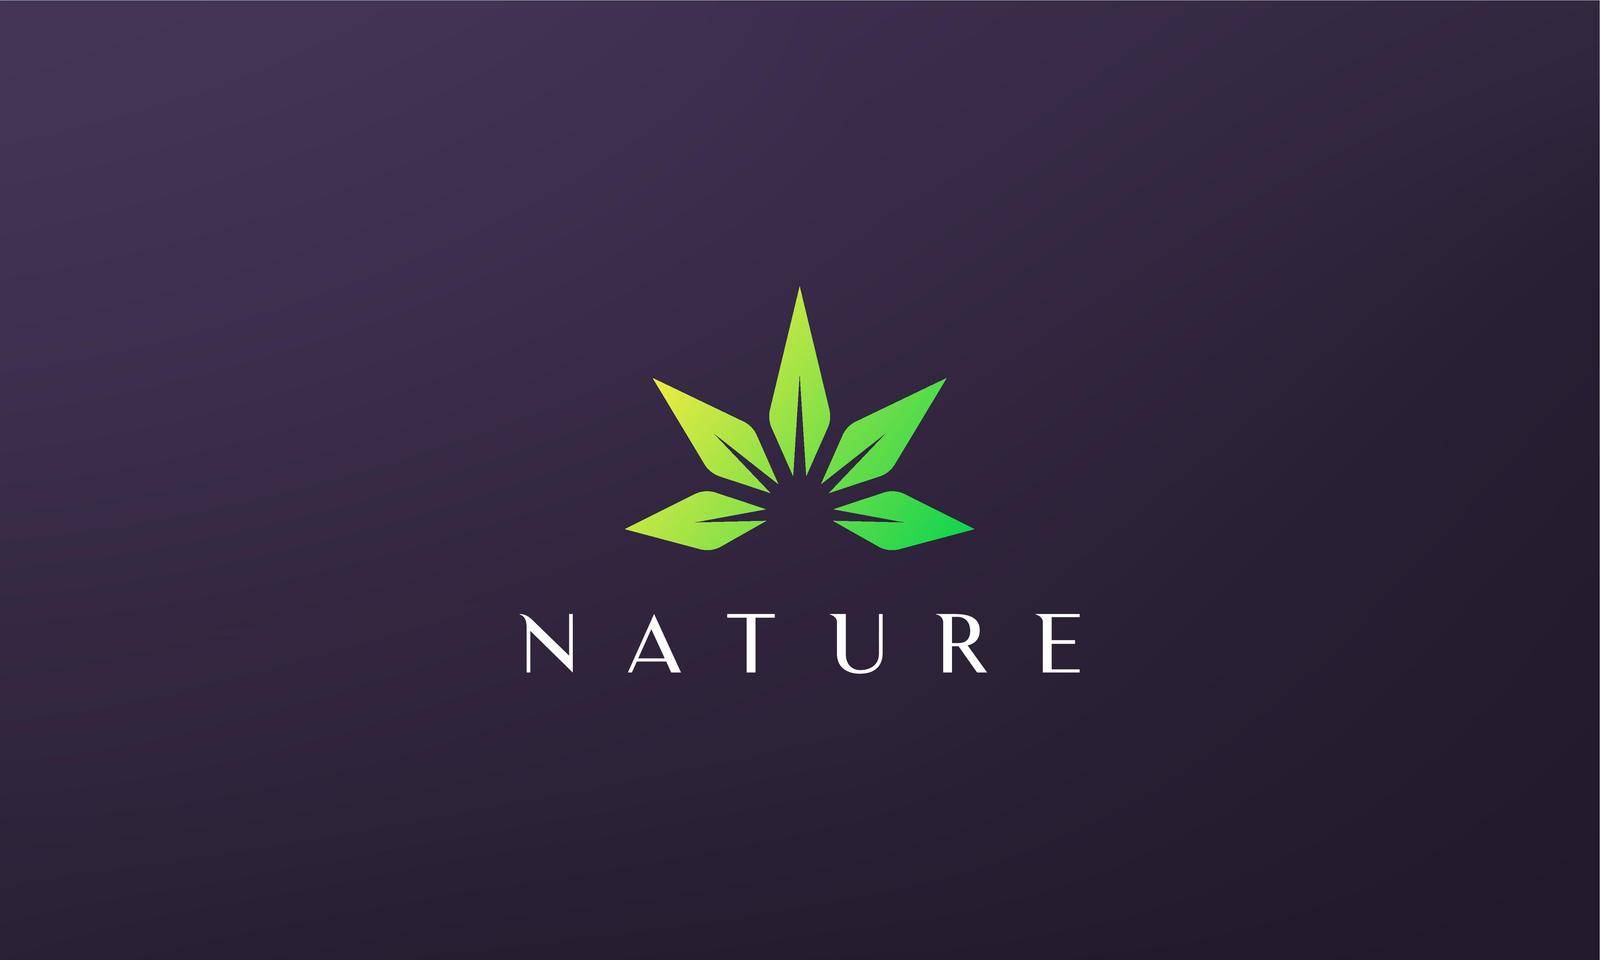 Abstract green marijuana leaf logo in a simple and modern style by murnifine